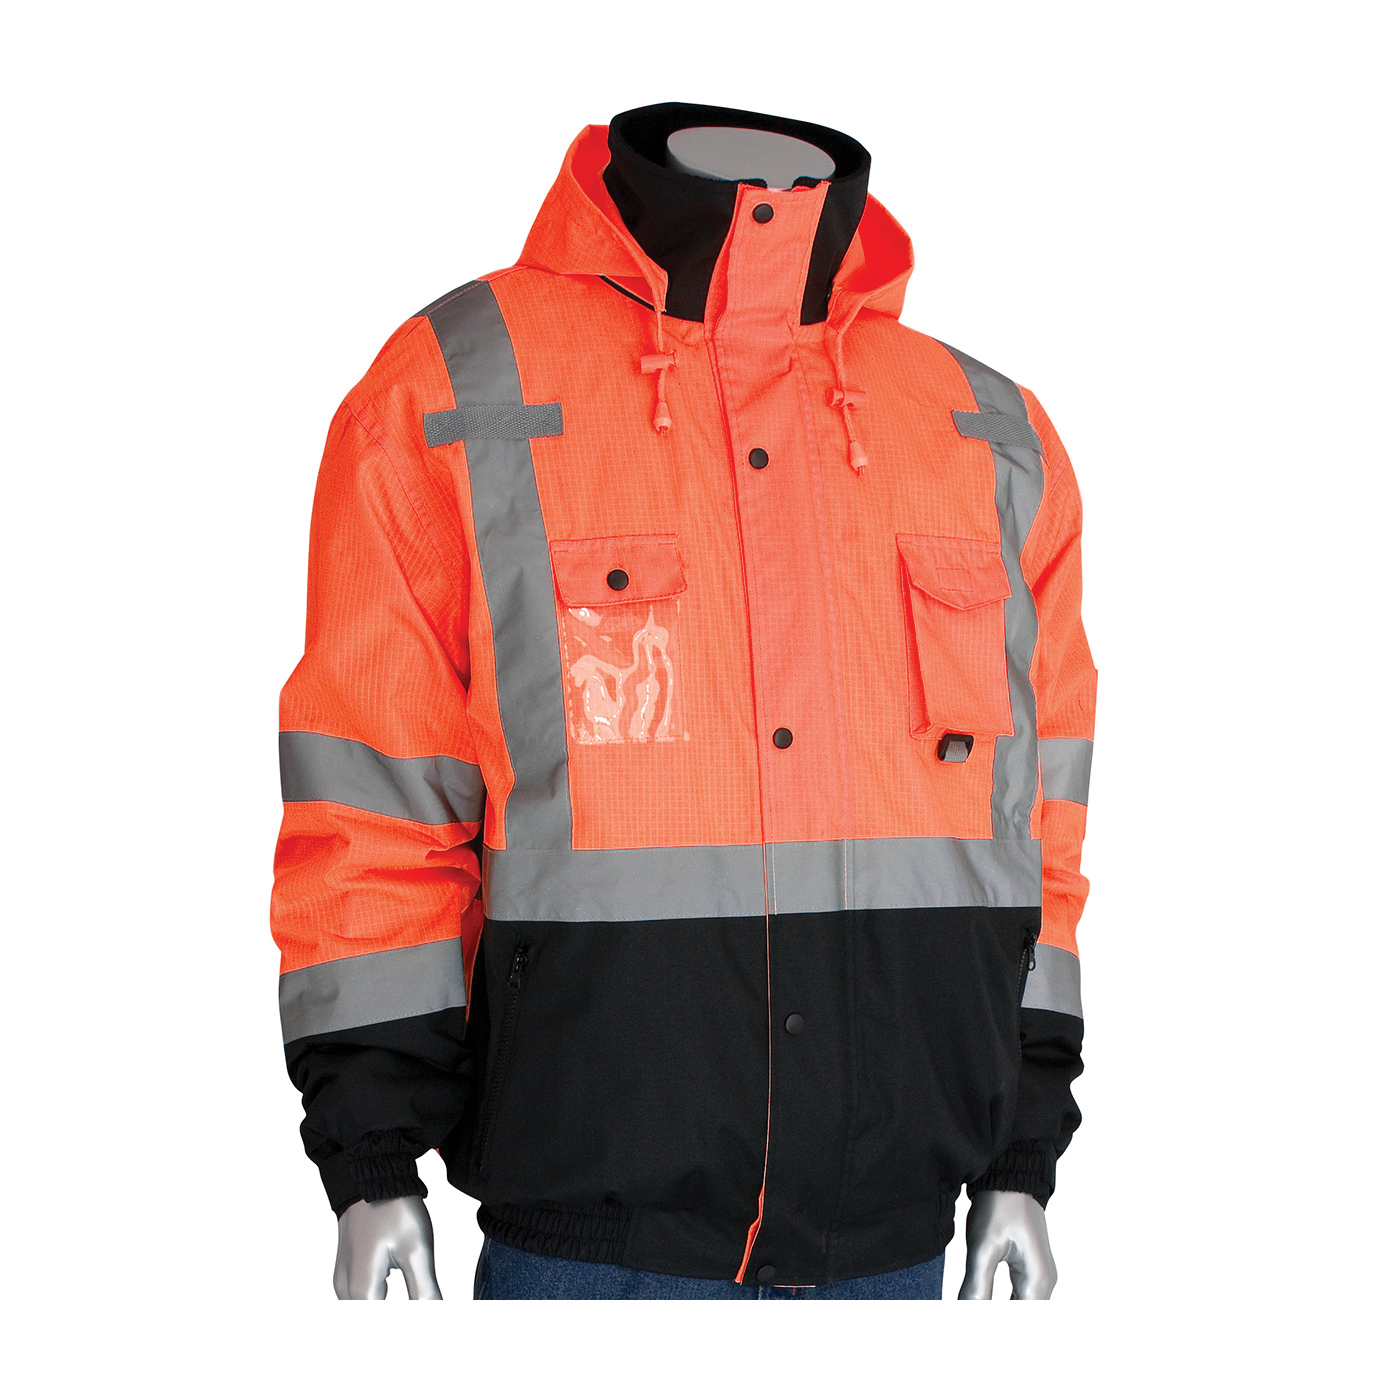 PIP® 333-1770-OR/L Bomber Jacket With Zip-Out Fleece Liner, Hi-Viz Orange, Polyester, 56 in Chest, Resists: Water, Specifications Met: ANSI 107 Class 3 Type R